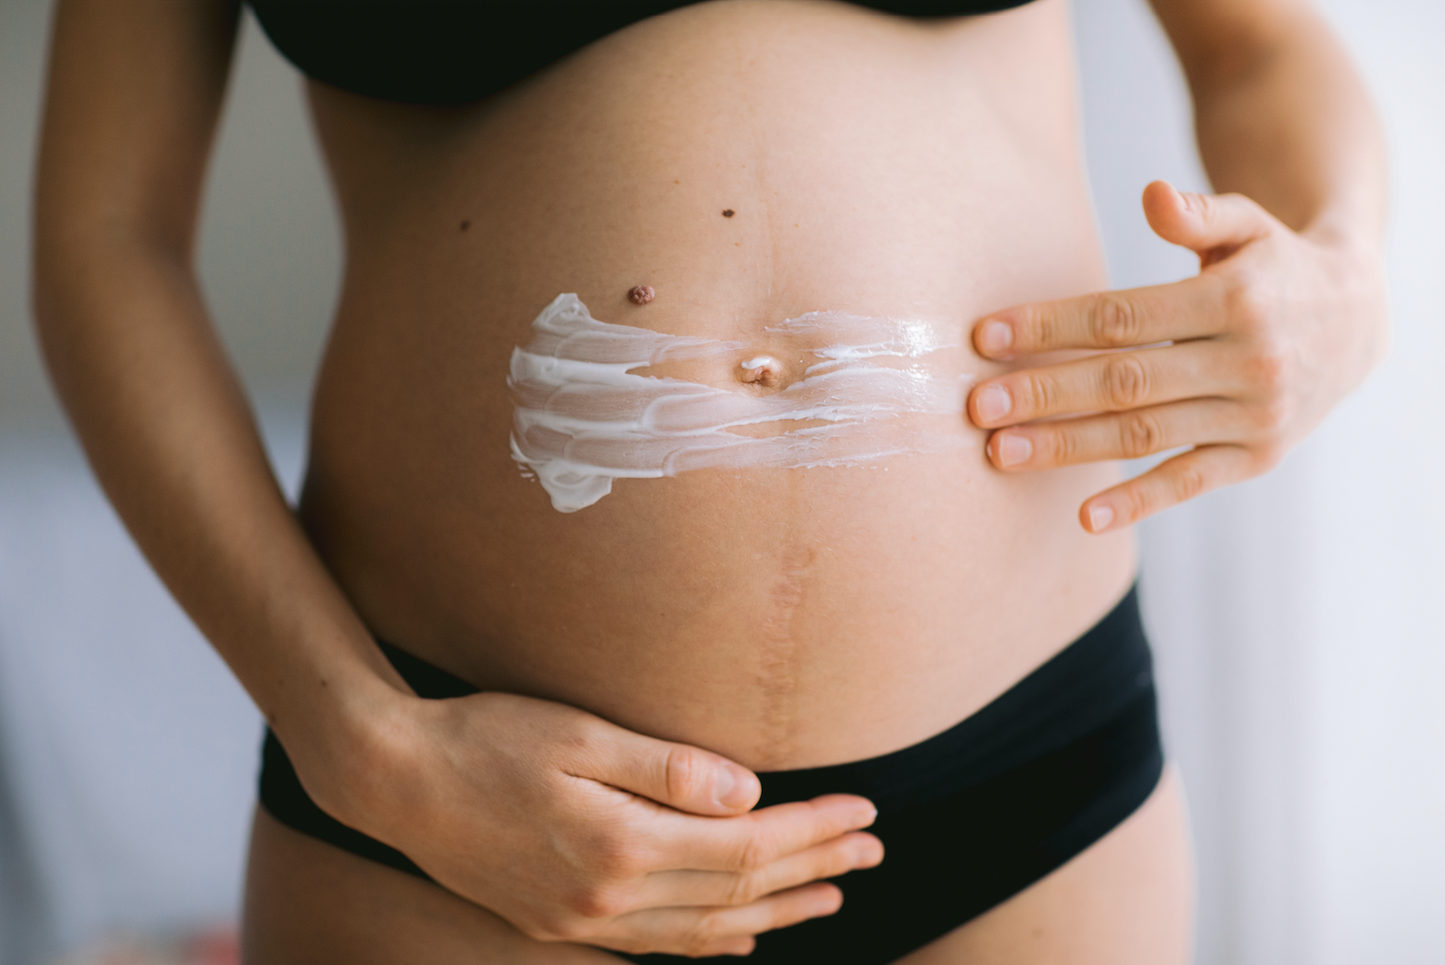 How To Prevent Stretch Marks | does moisturizing prevent stretch marks, stretch mark prevention cream, vitamin c for stretch marks